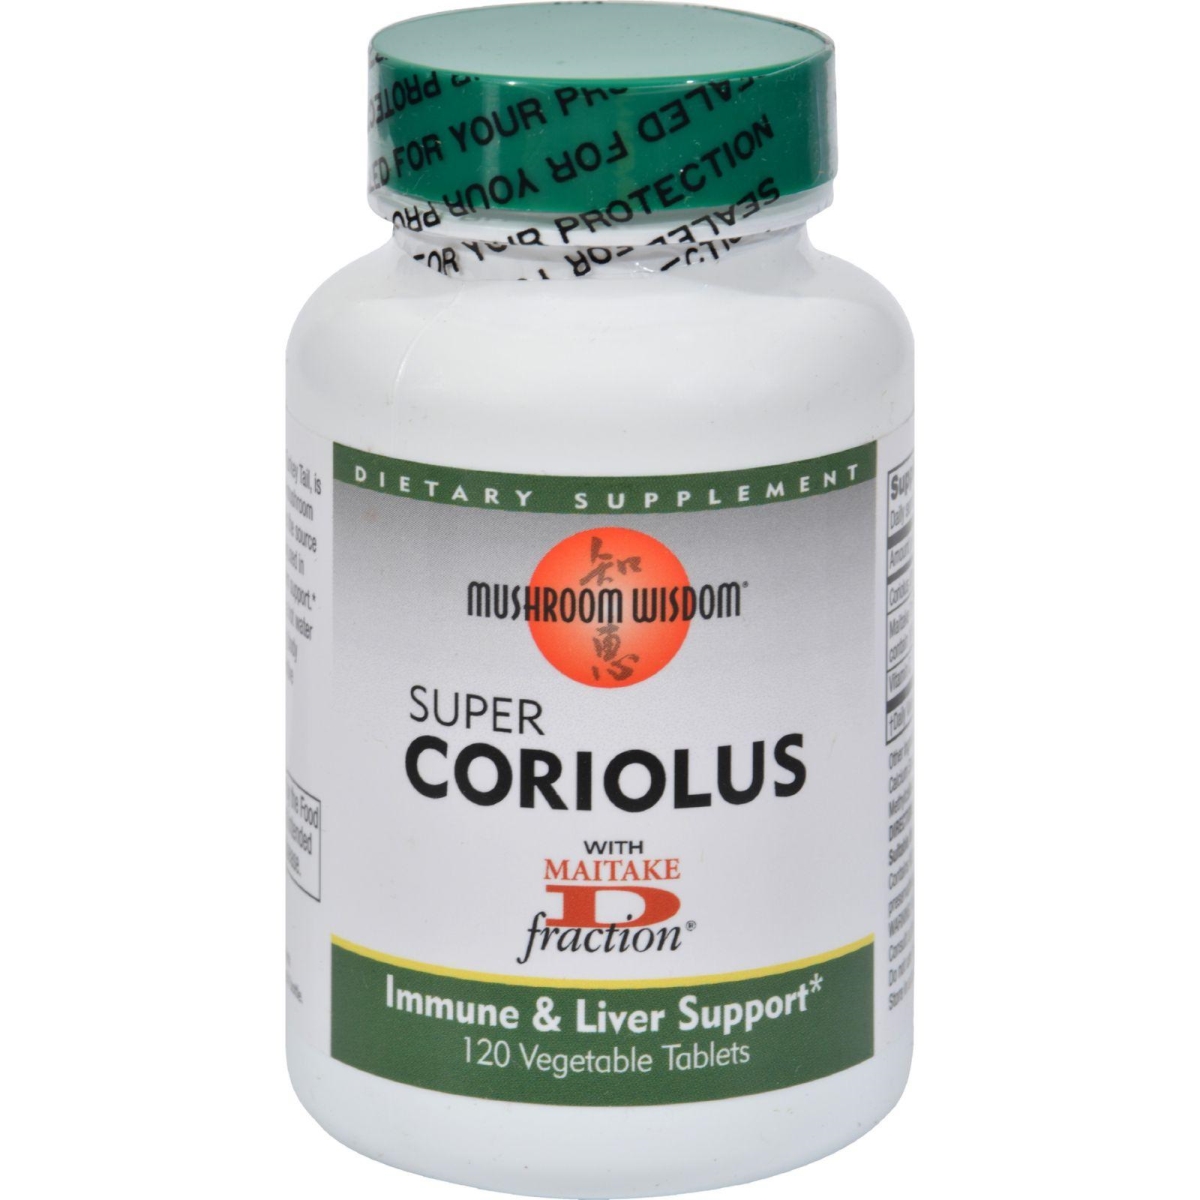 Hg0179192 Super Coriolus With Maitake D Fraction, 120 Tablets